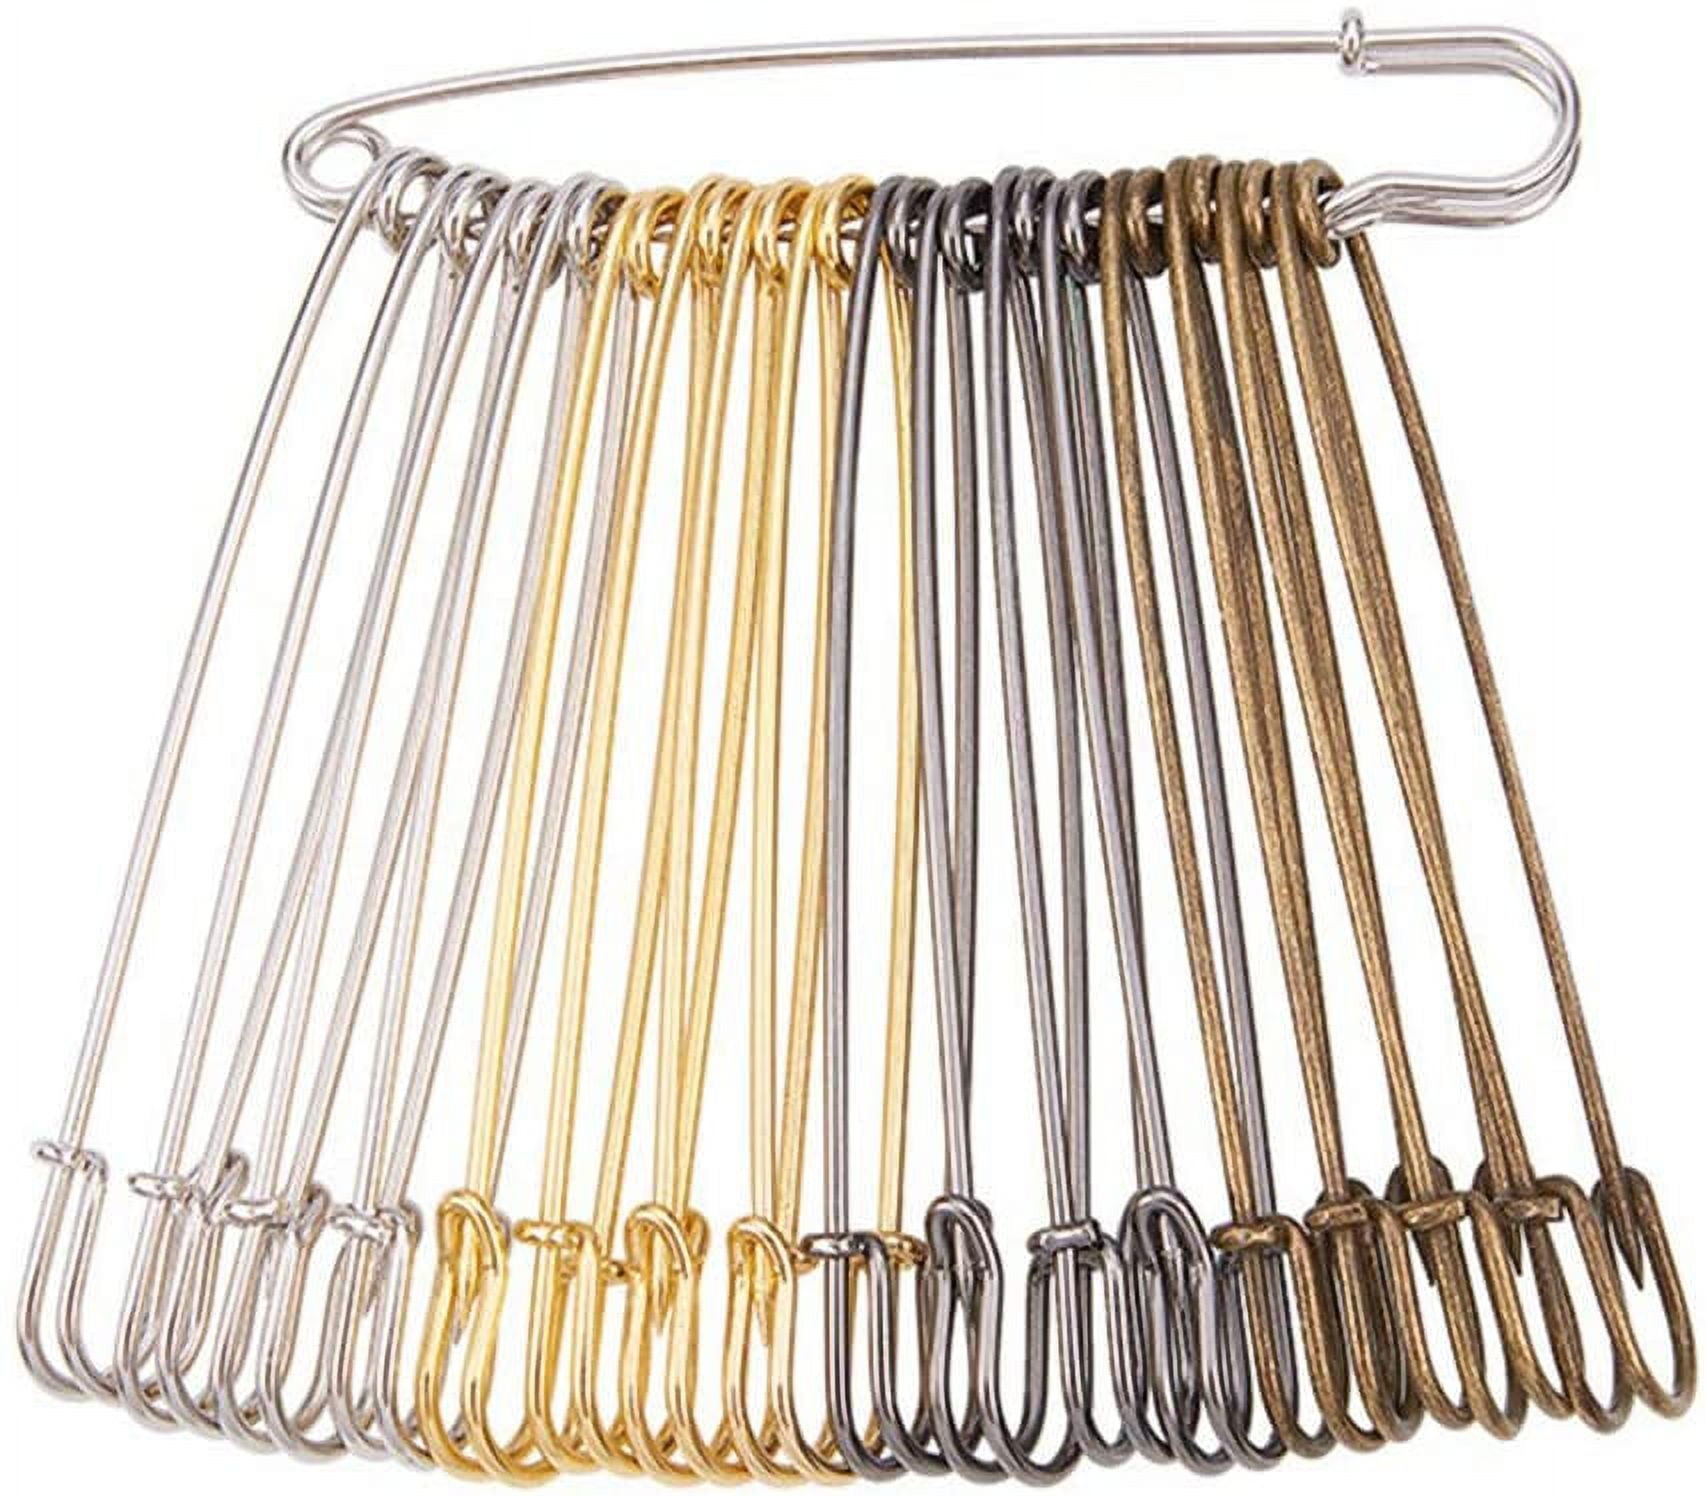 20PCS Safety Pins Extra Large Heavy Duty Safety Pins for Blankets ...